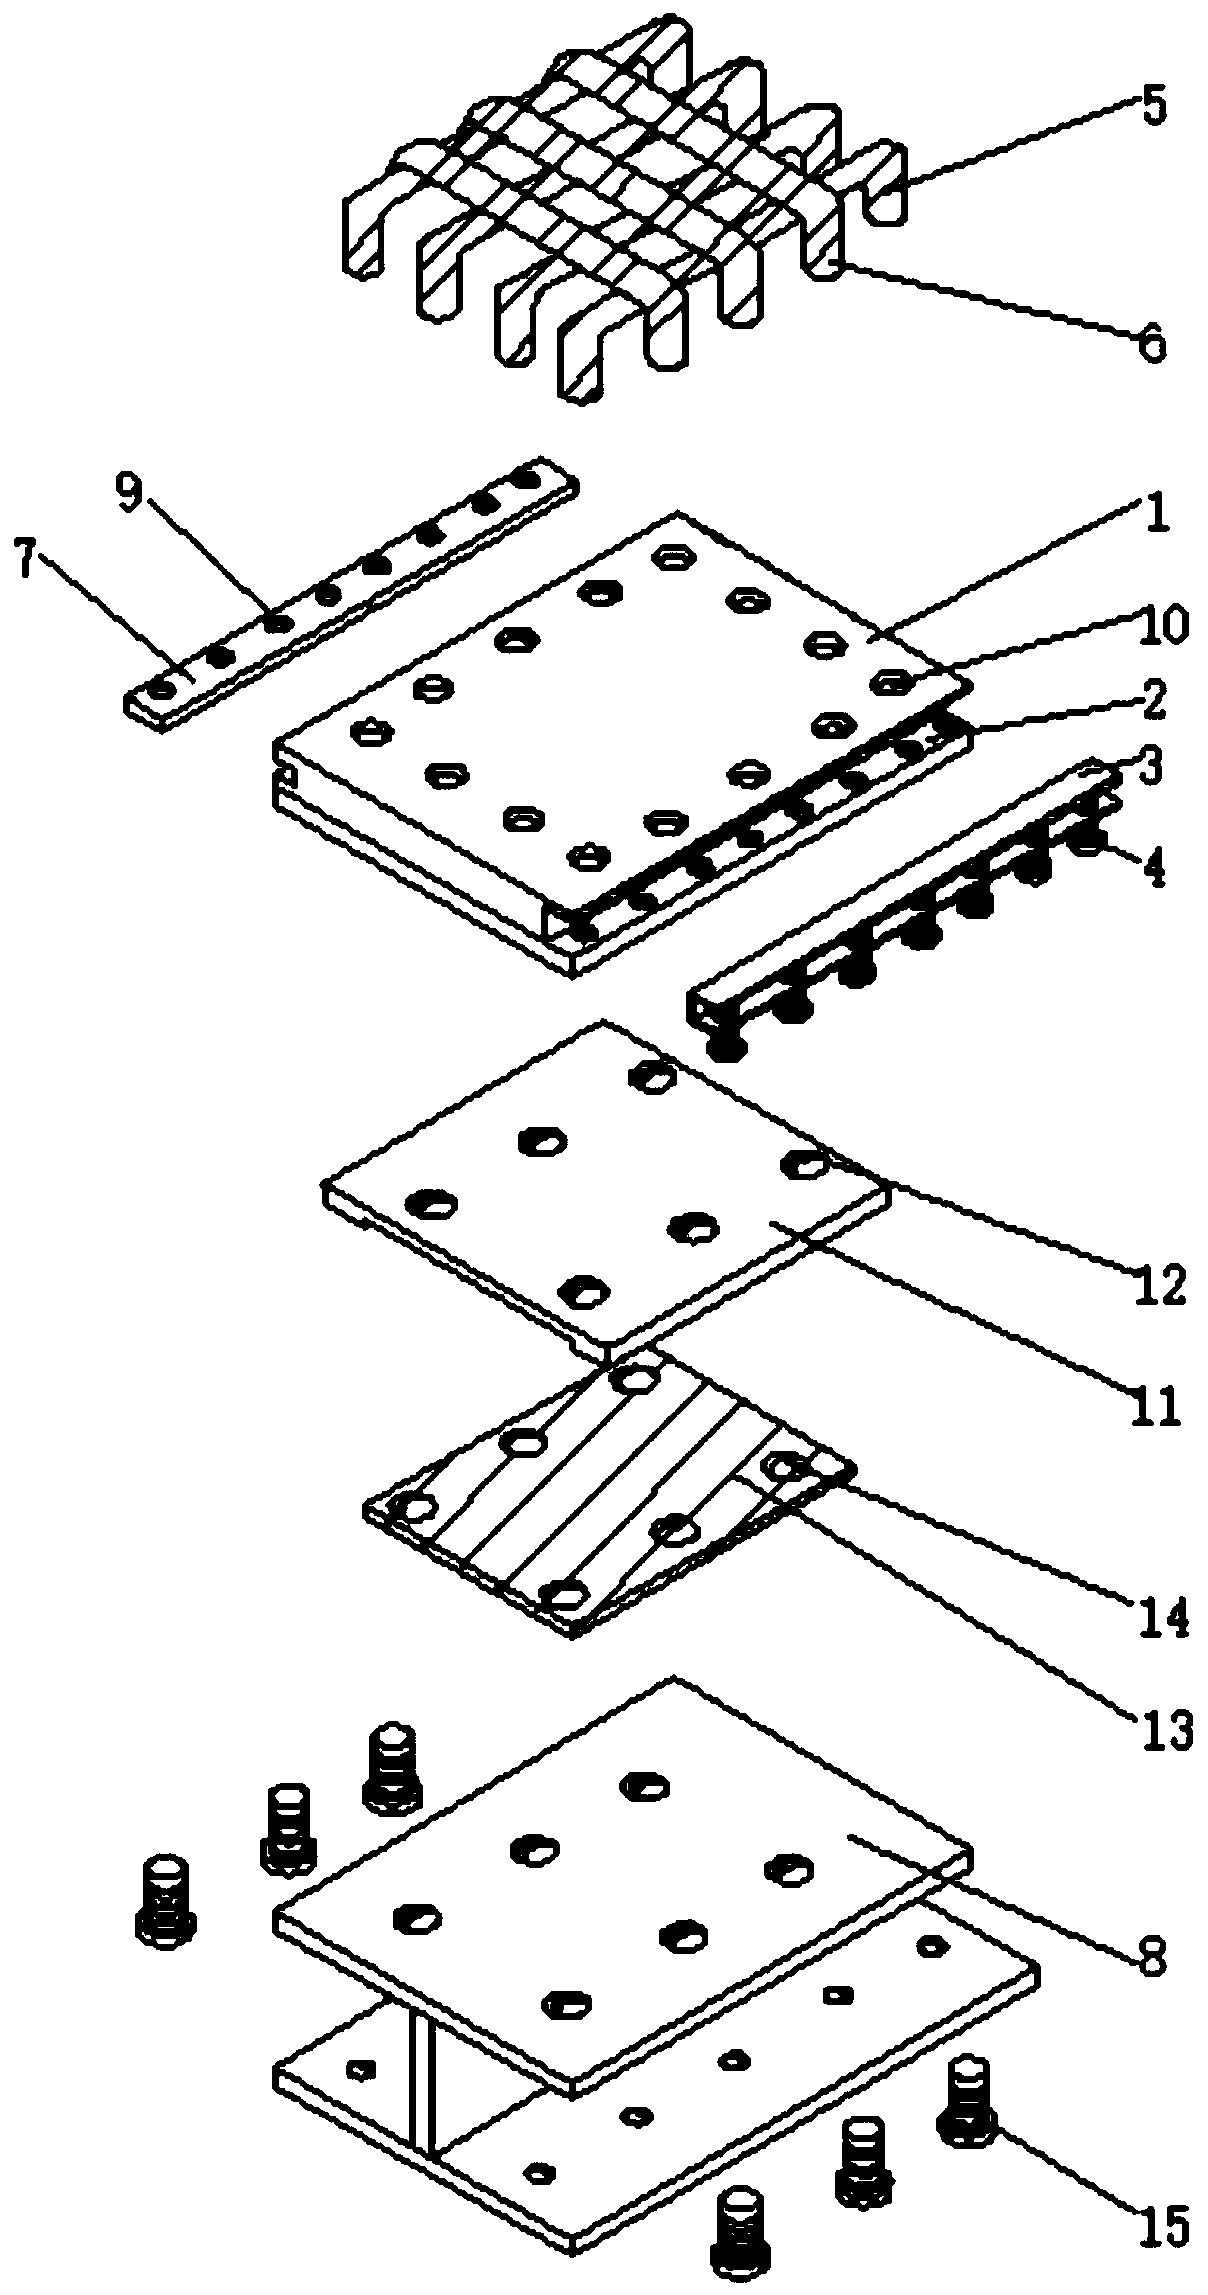 Connecting part of assembly type steel-concrete combination structure used for steel-concrete combined bridge